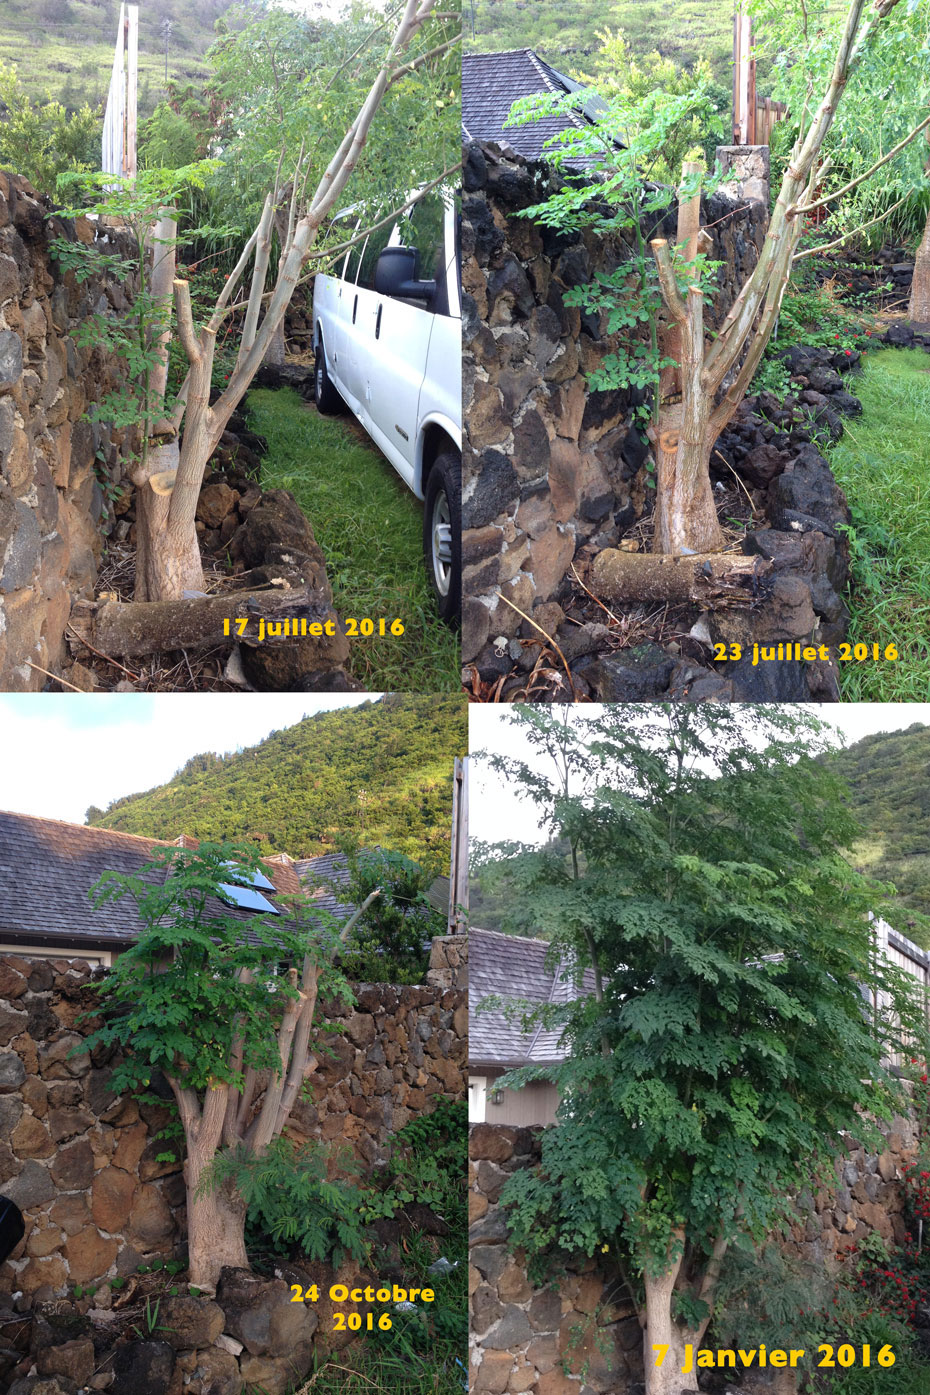 4 pictures in one of stages of regrowth of a Moringa tree within six month